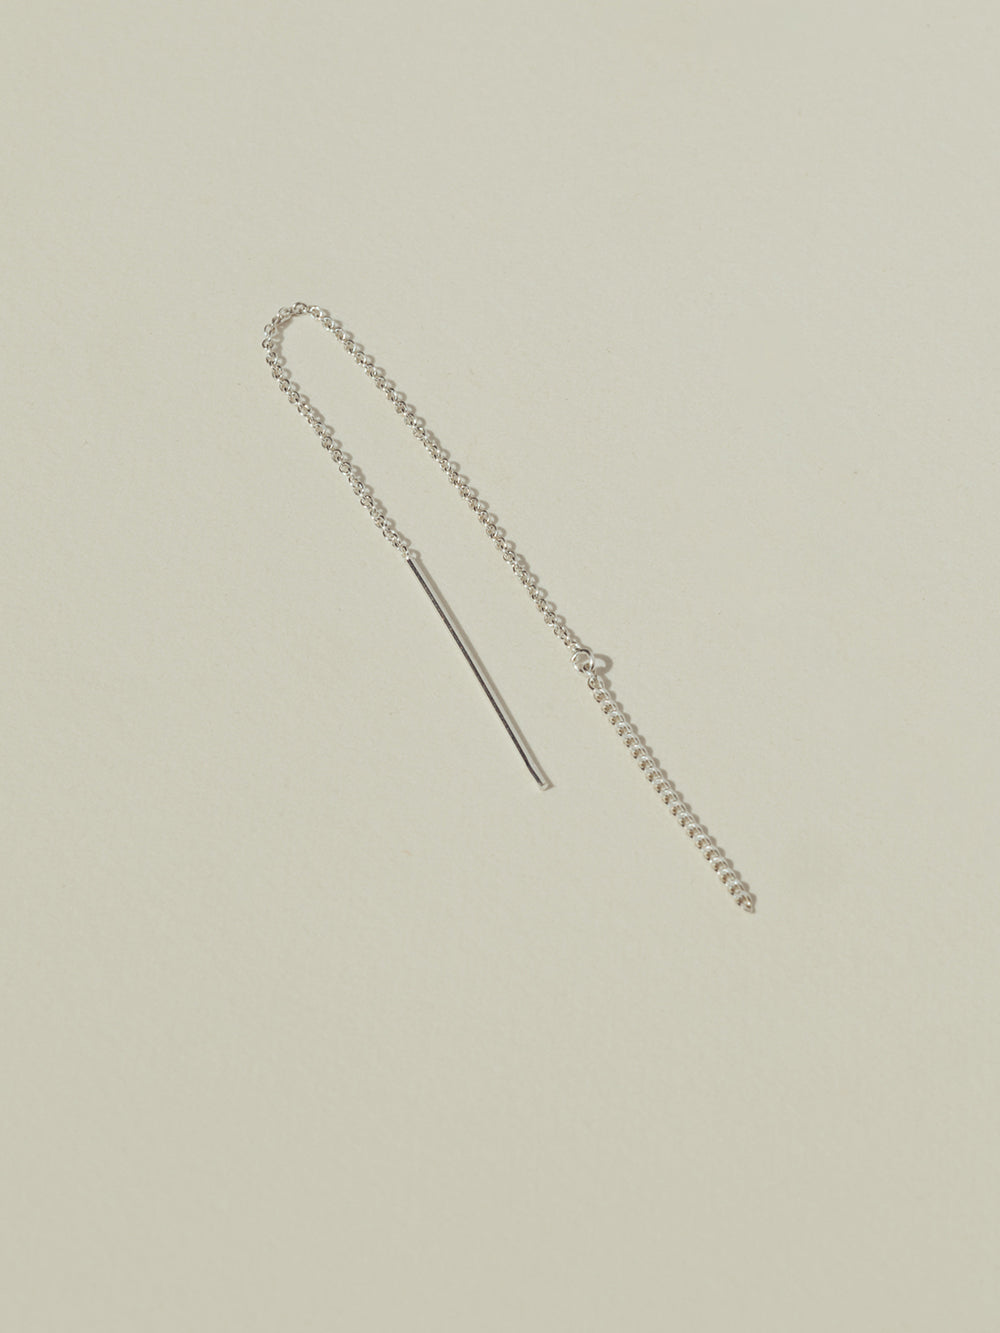 Beauty & Simplicity | 925 Sterling Silver